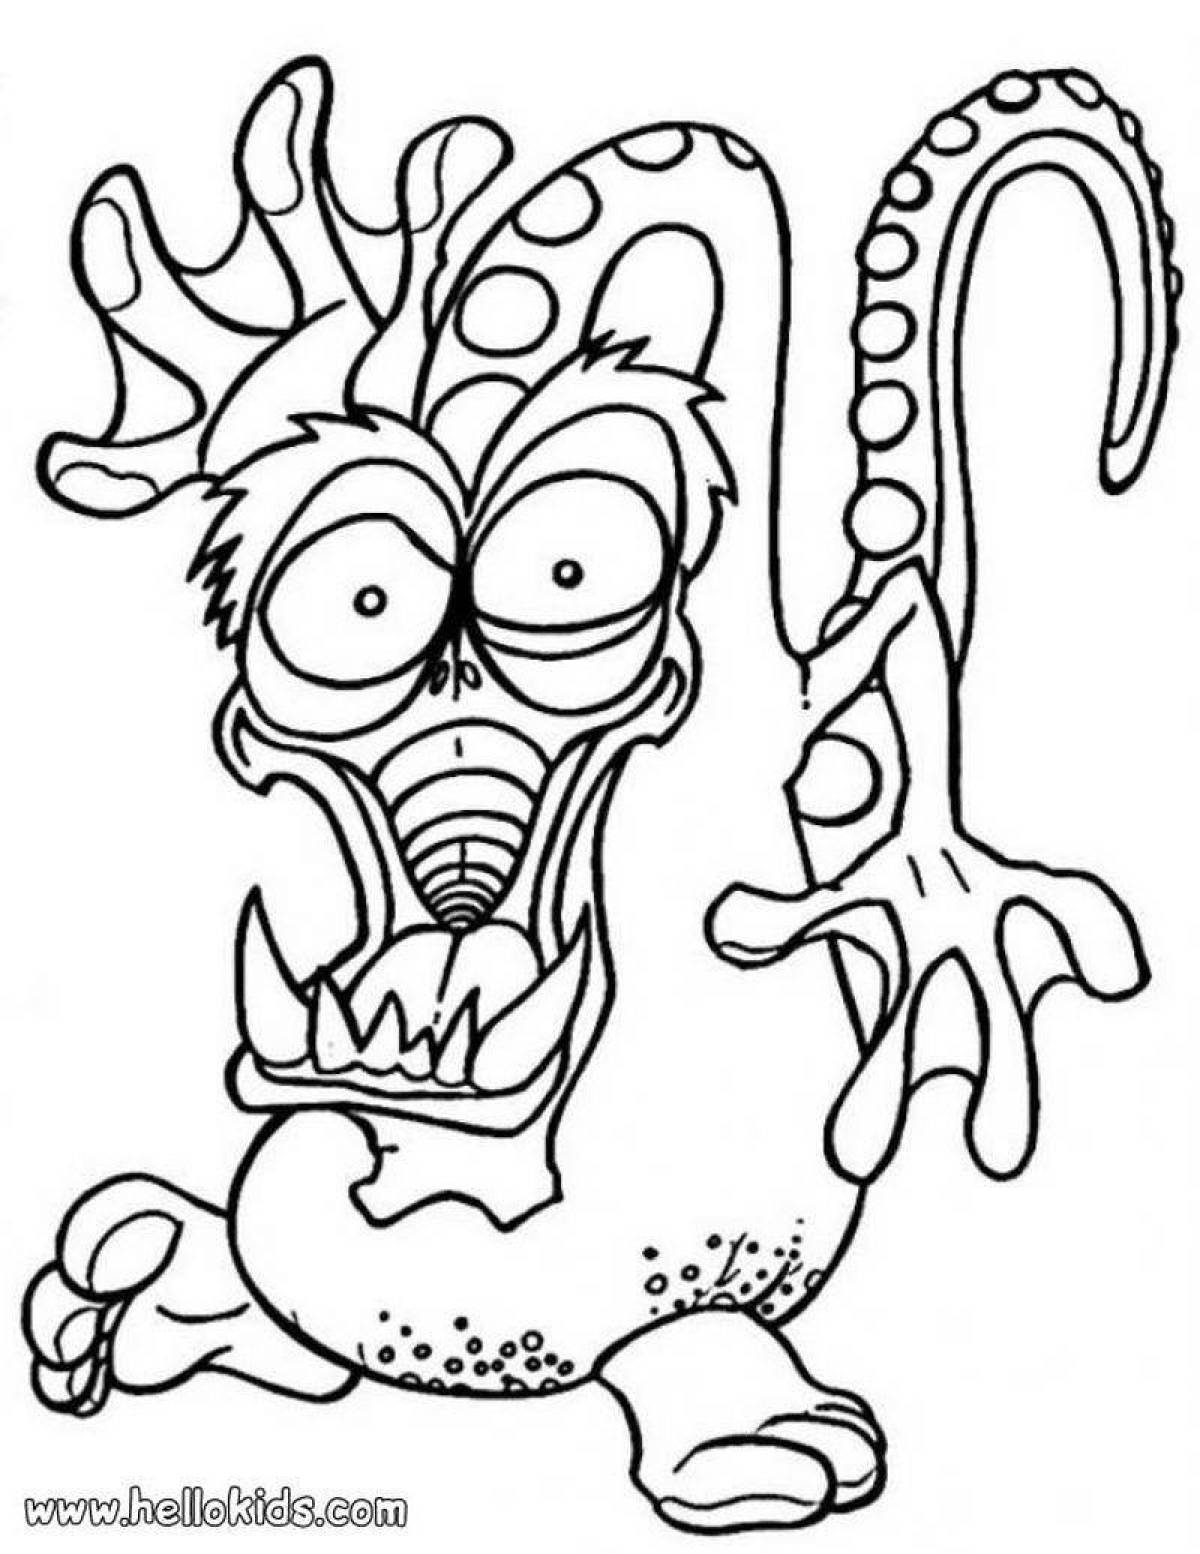 Maxi monsters amazing coloring pages